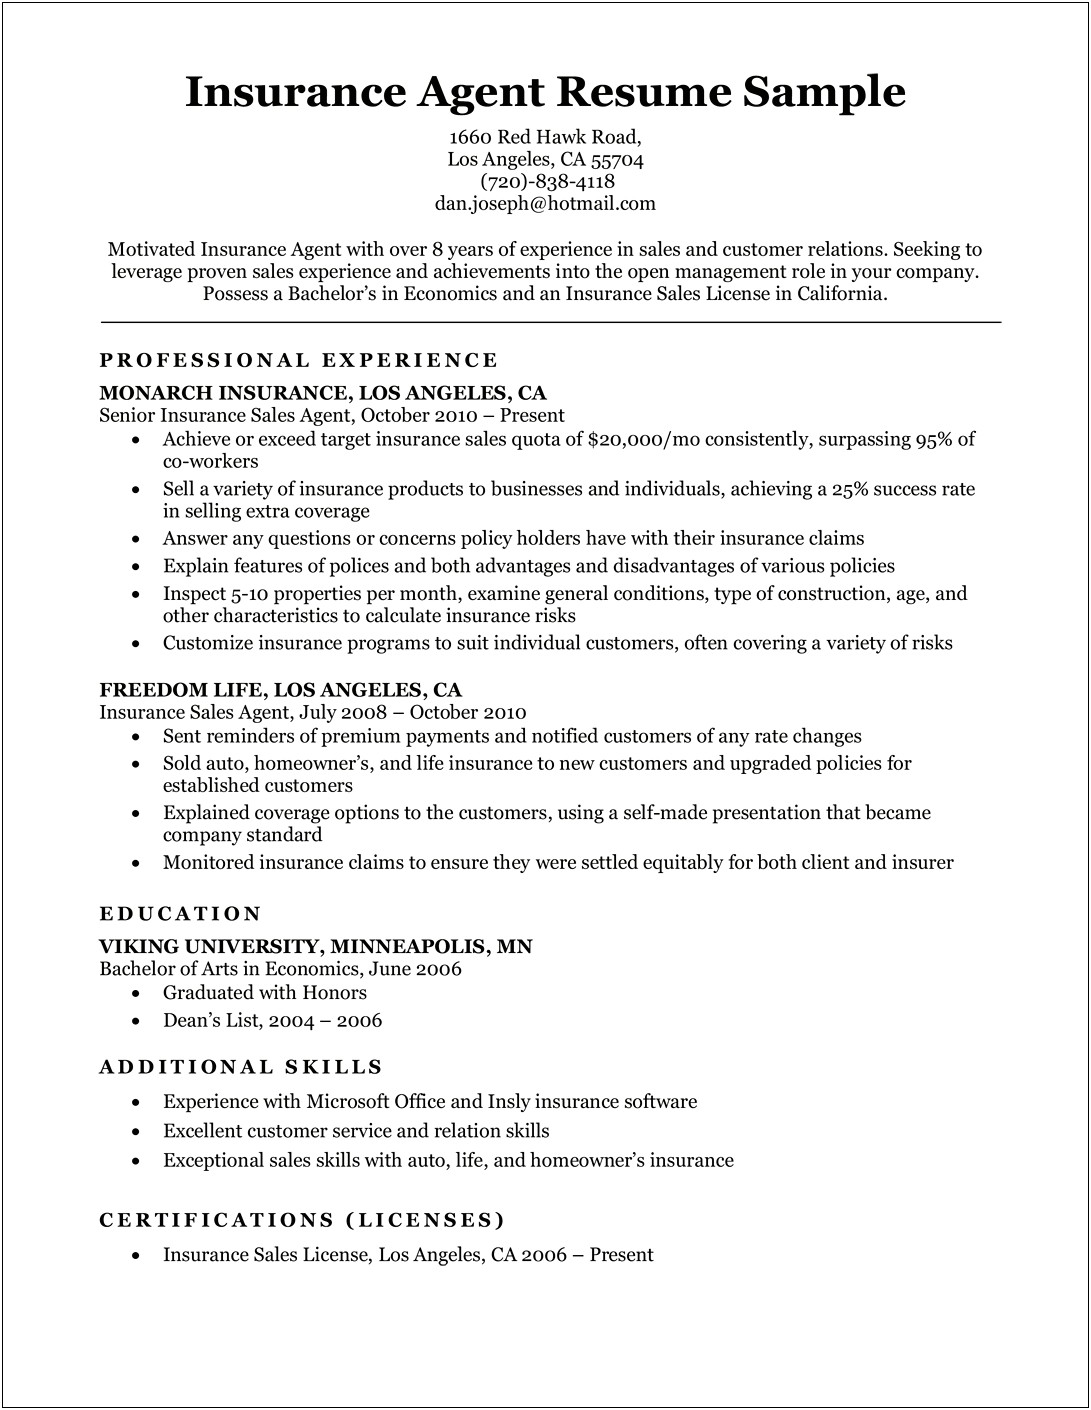 General Entry Level Resume Objective Examples